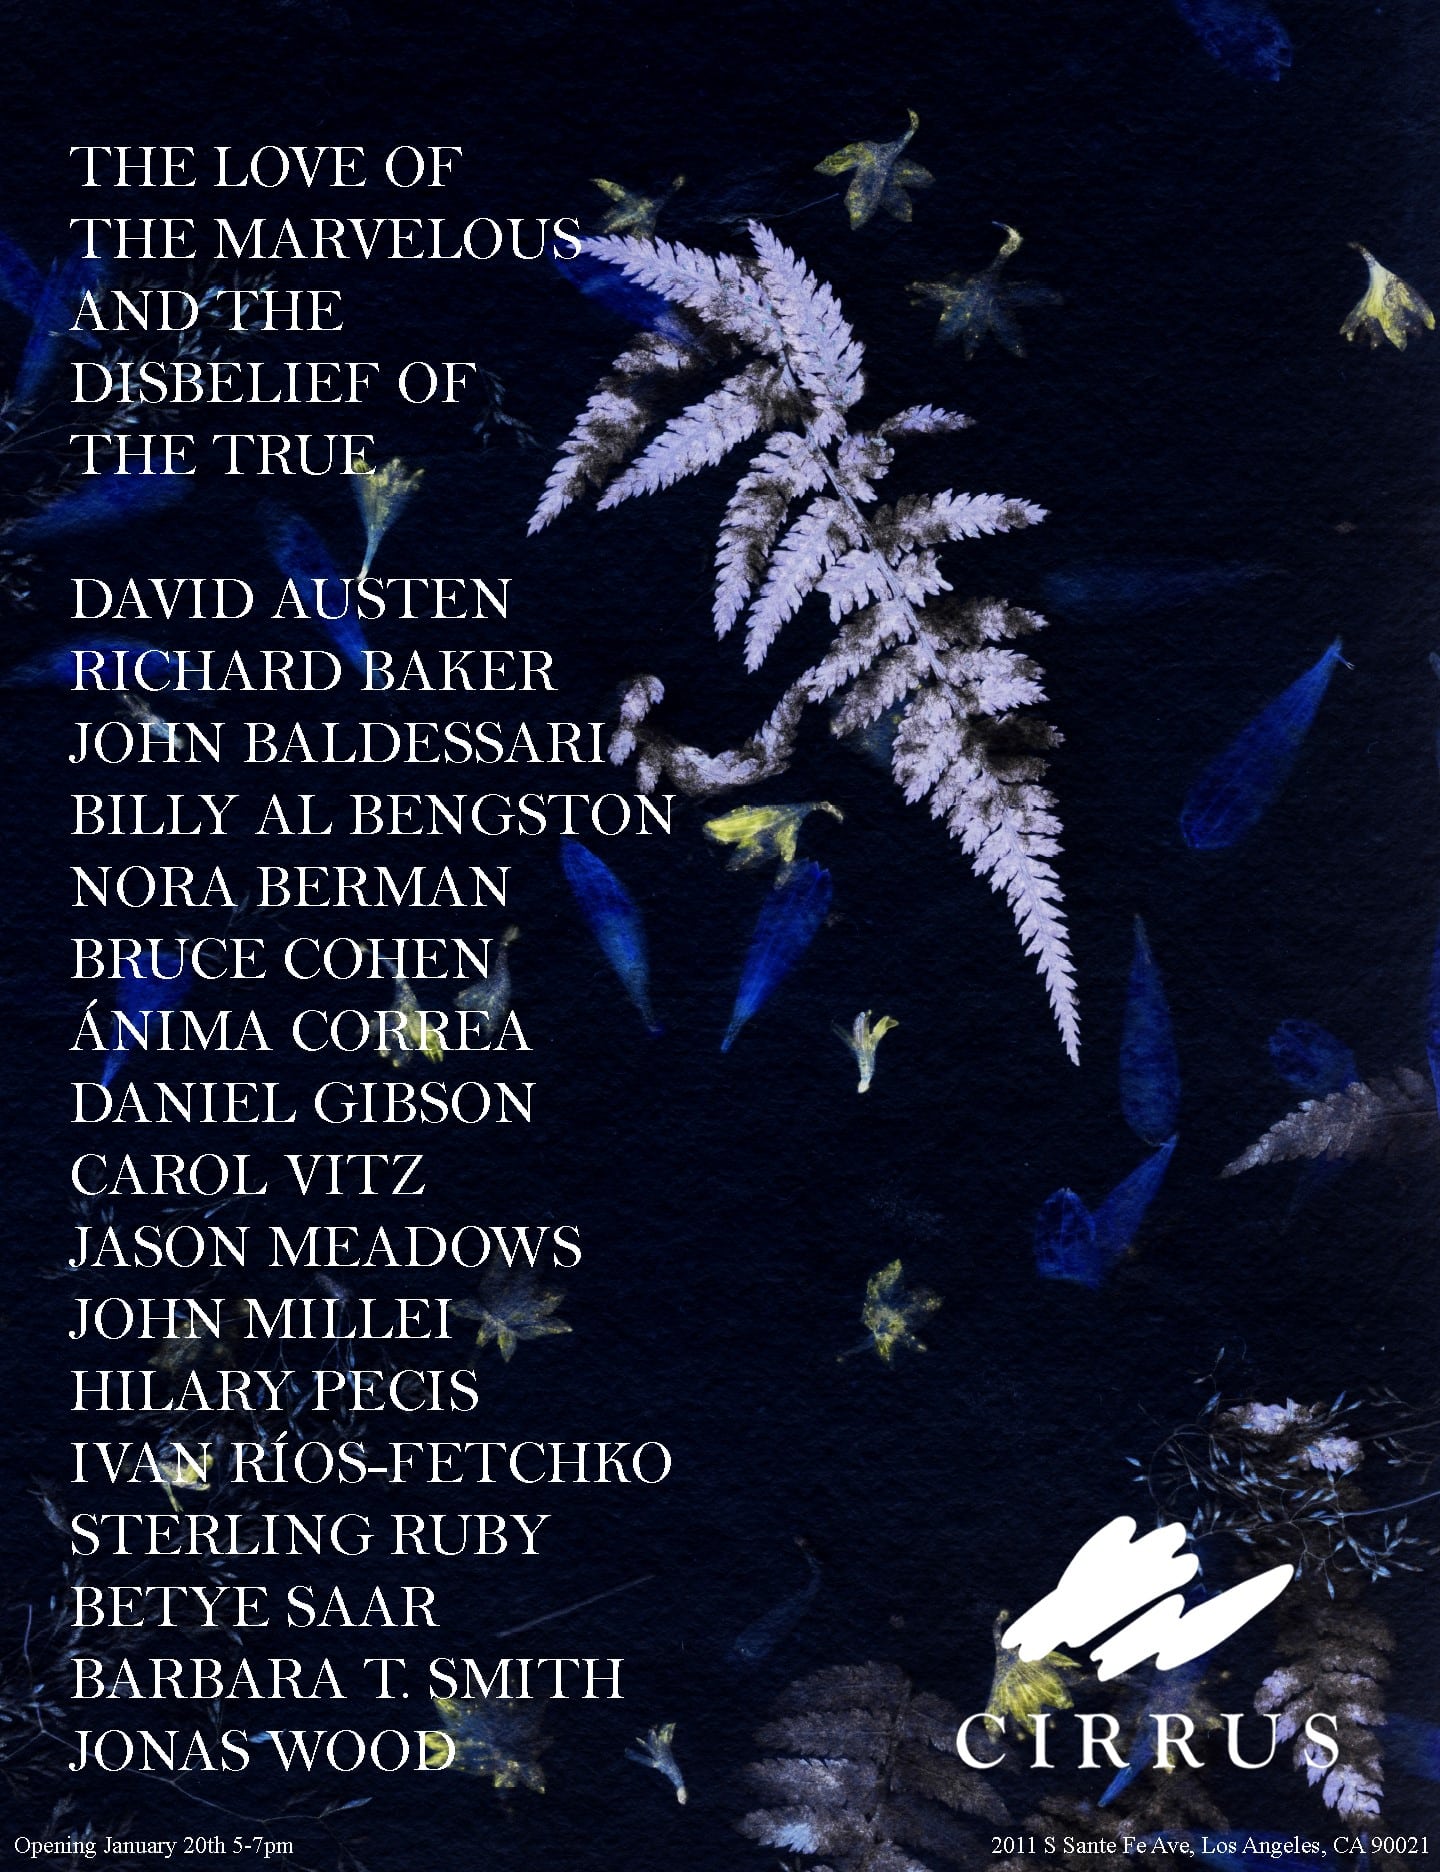 Exhibition poster for The Love of the Marvelous and the Disbelief of the True featuring names of 17 artists against dark photo of plants